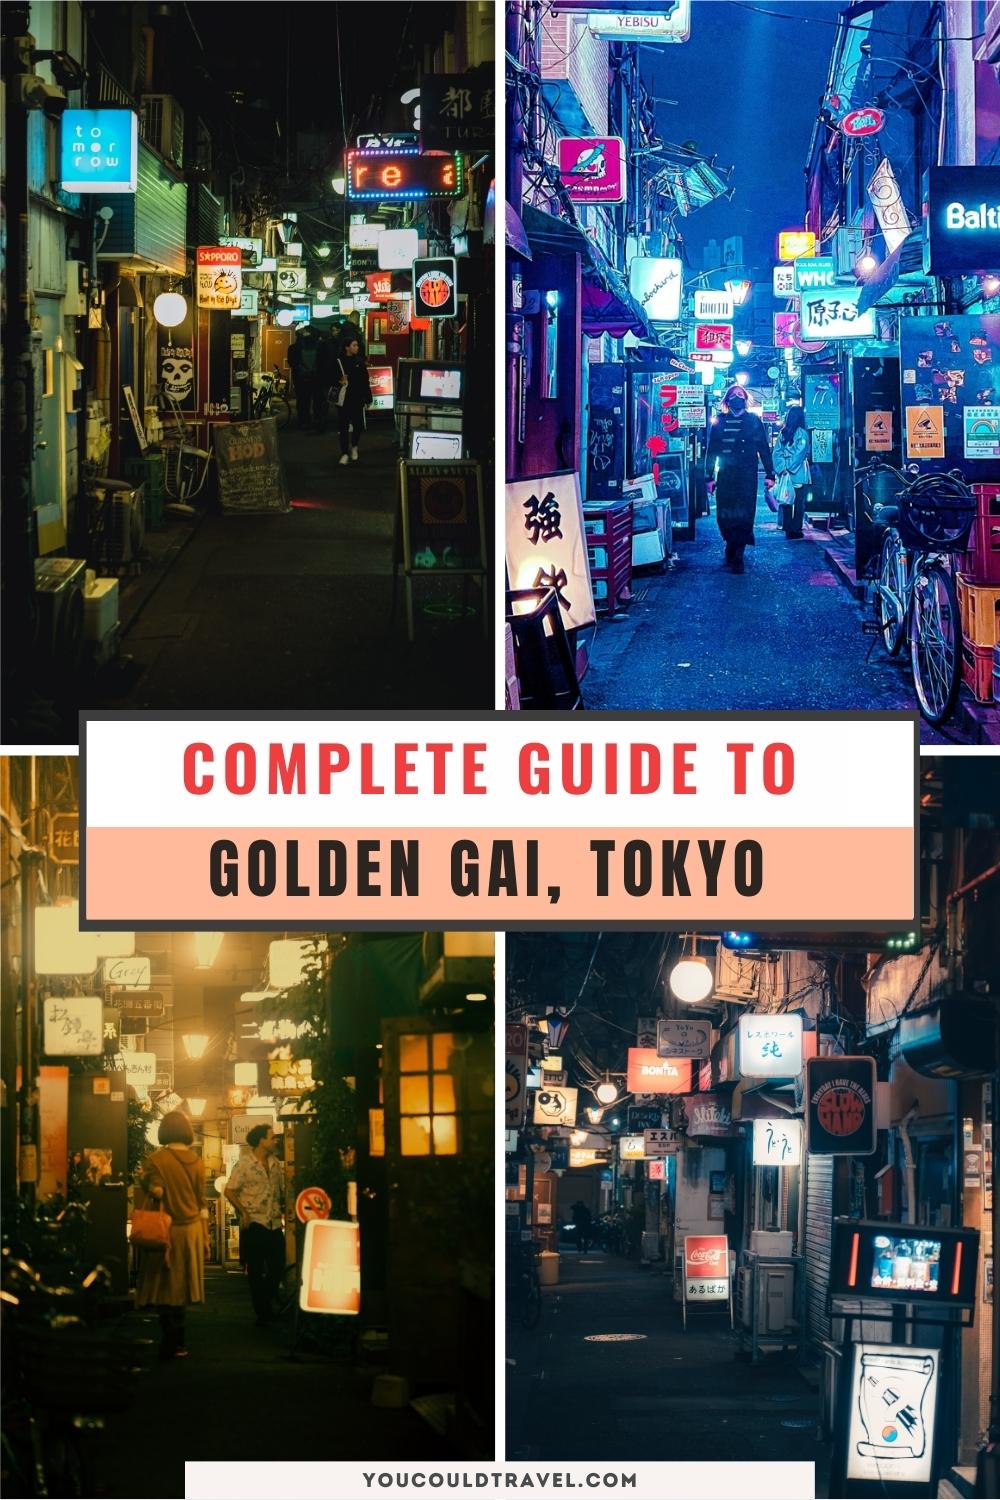 Complete guide to Golden Gai